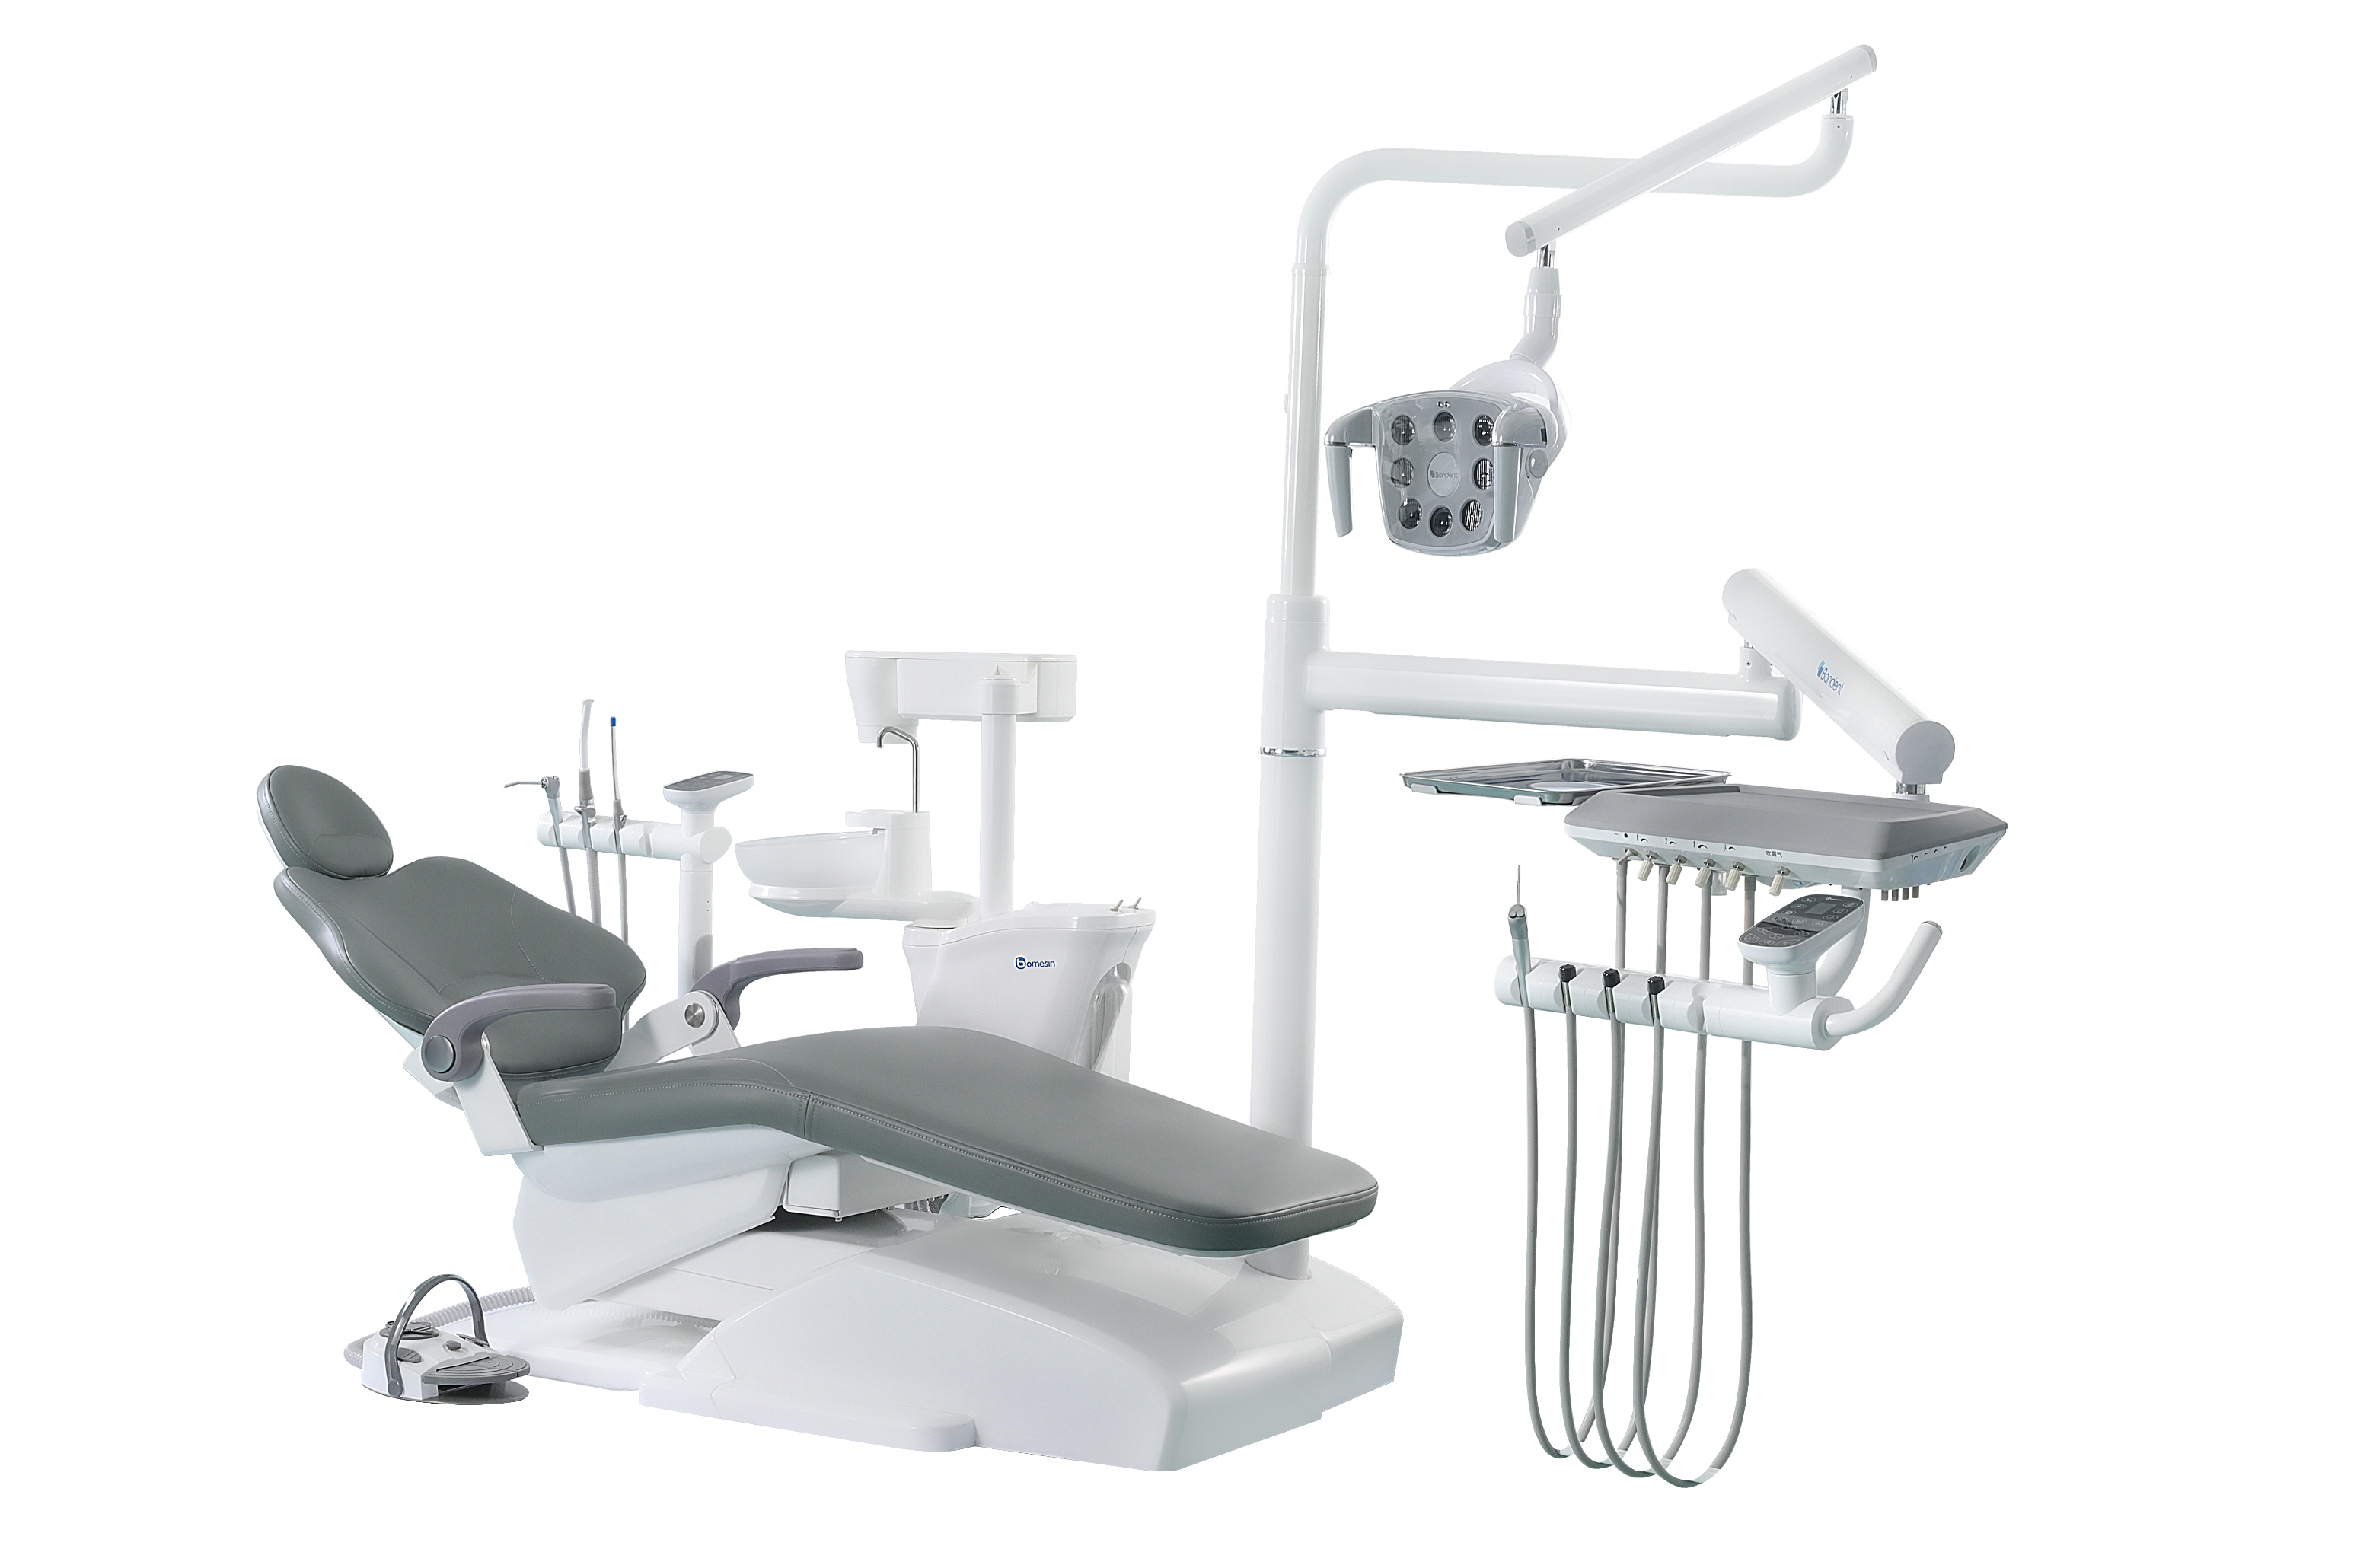 Revolutionize the dental experience: New dental chairs bring comfort and efficiency